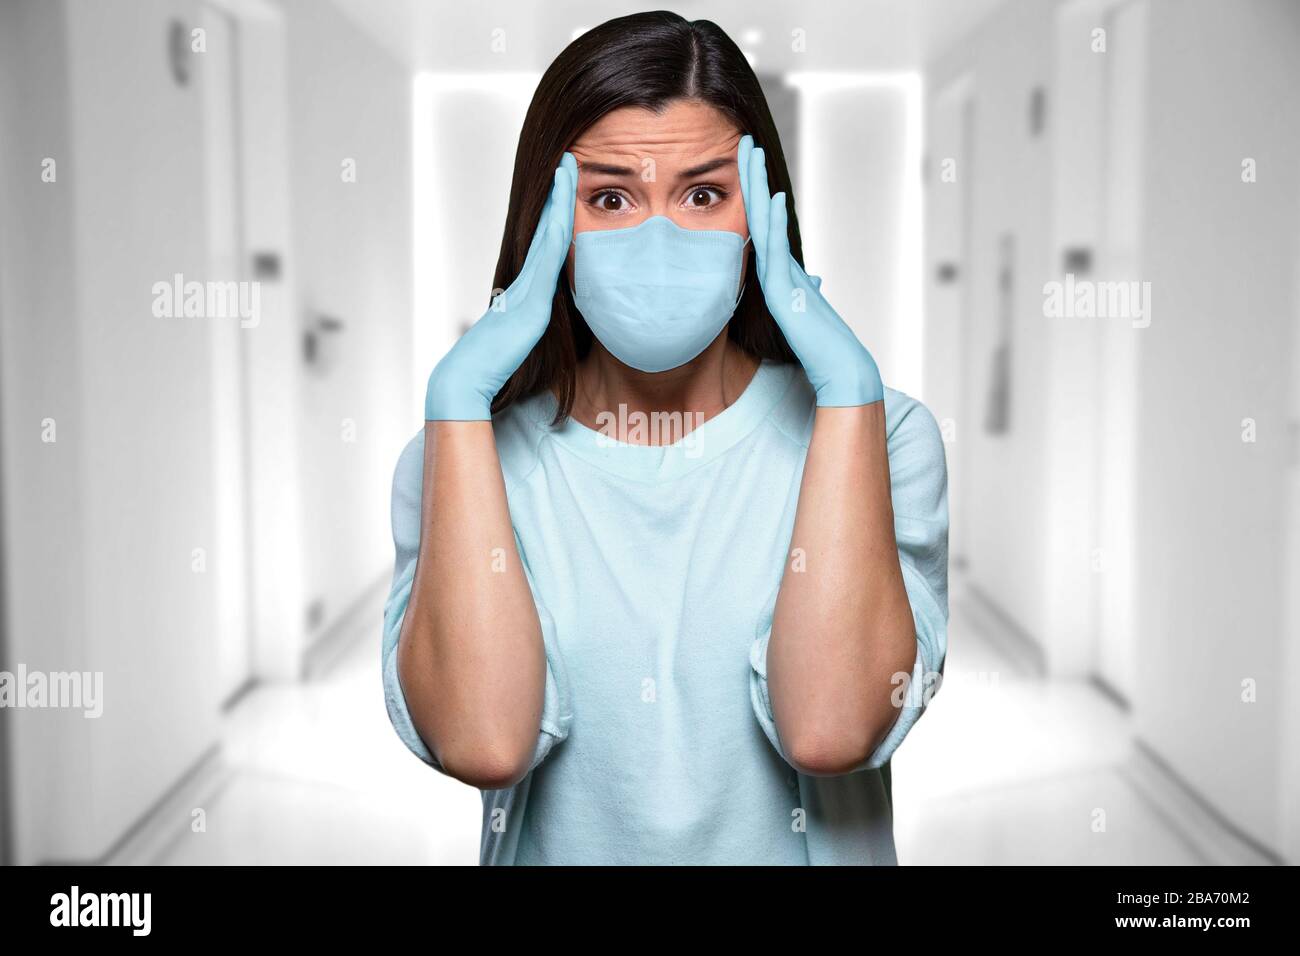 Hospital staff in distress, panicked, overwhelmed from emergency situation during health crisis female asian american medical worker Stock Photo